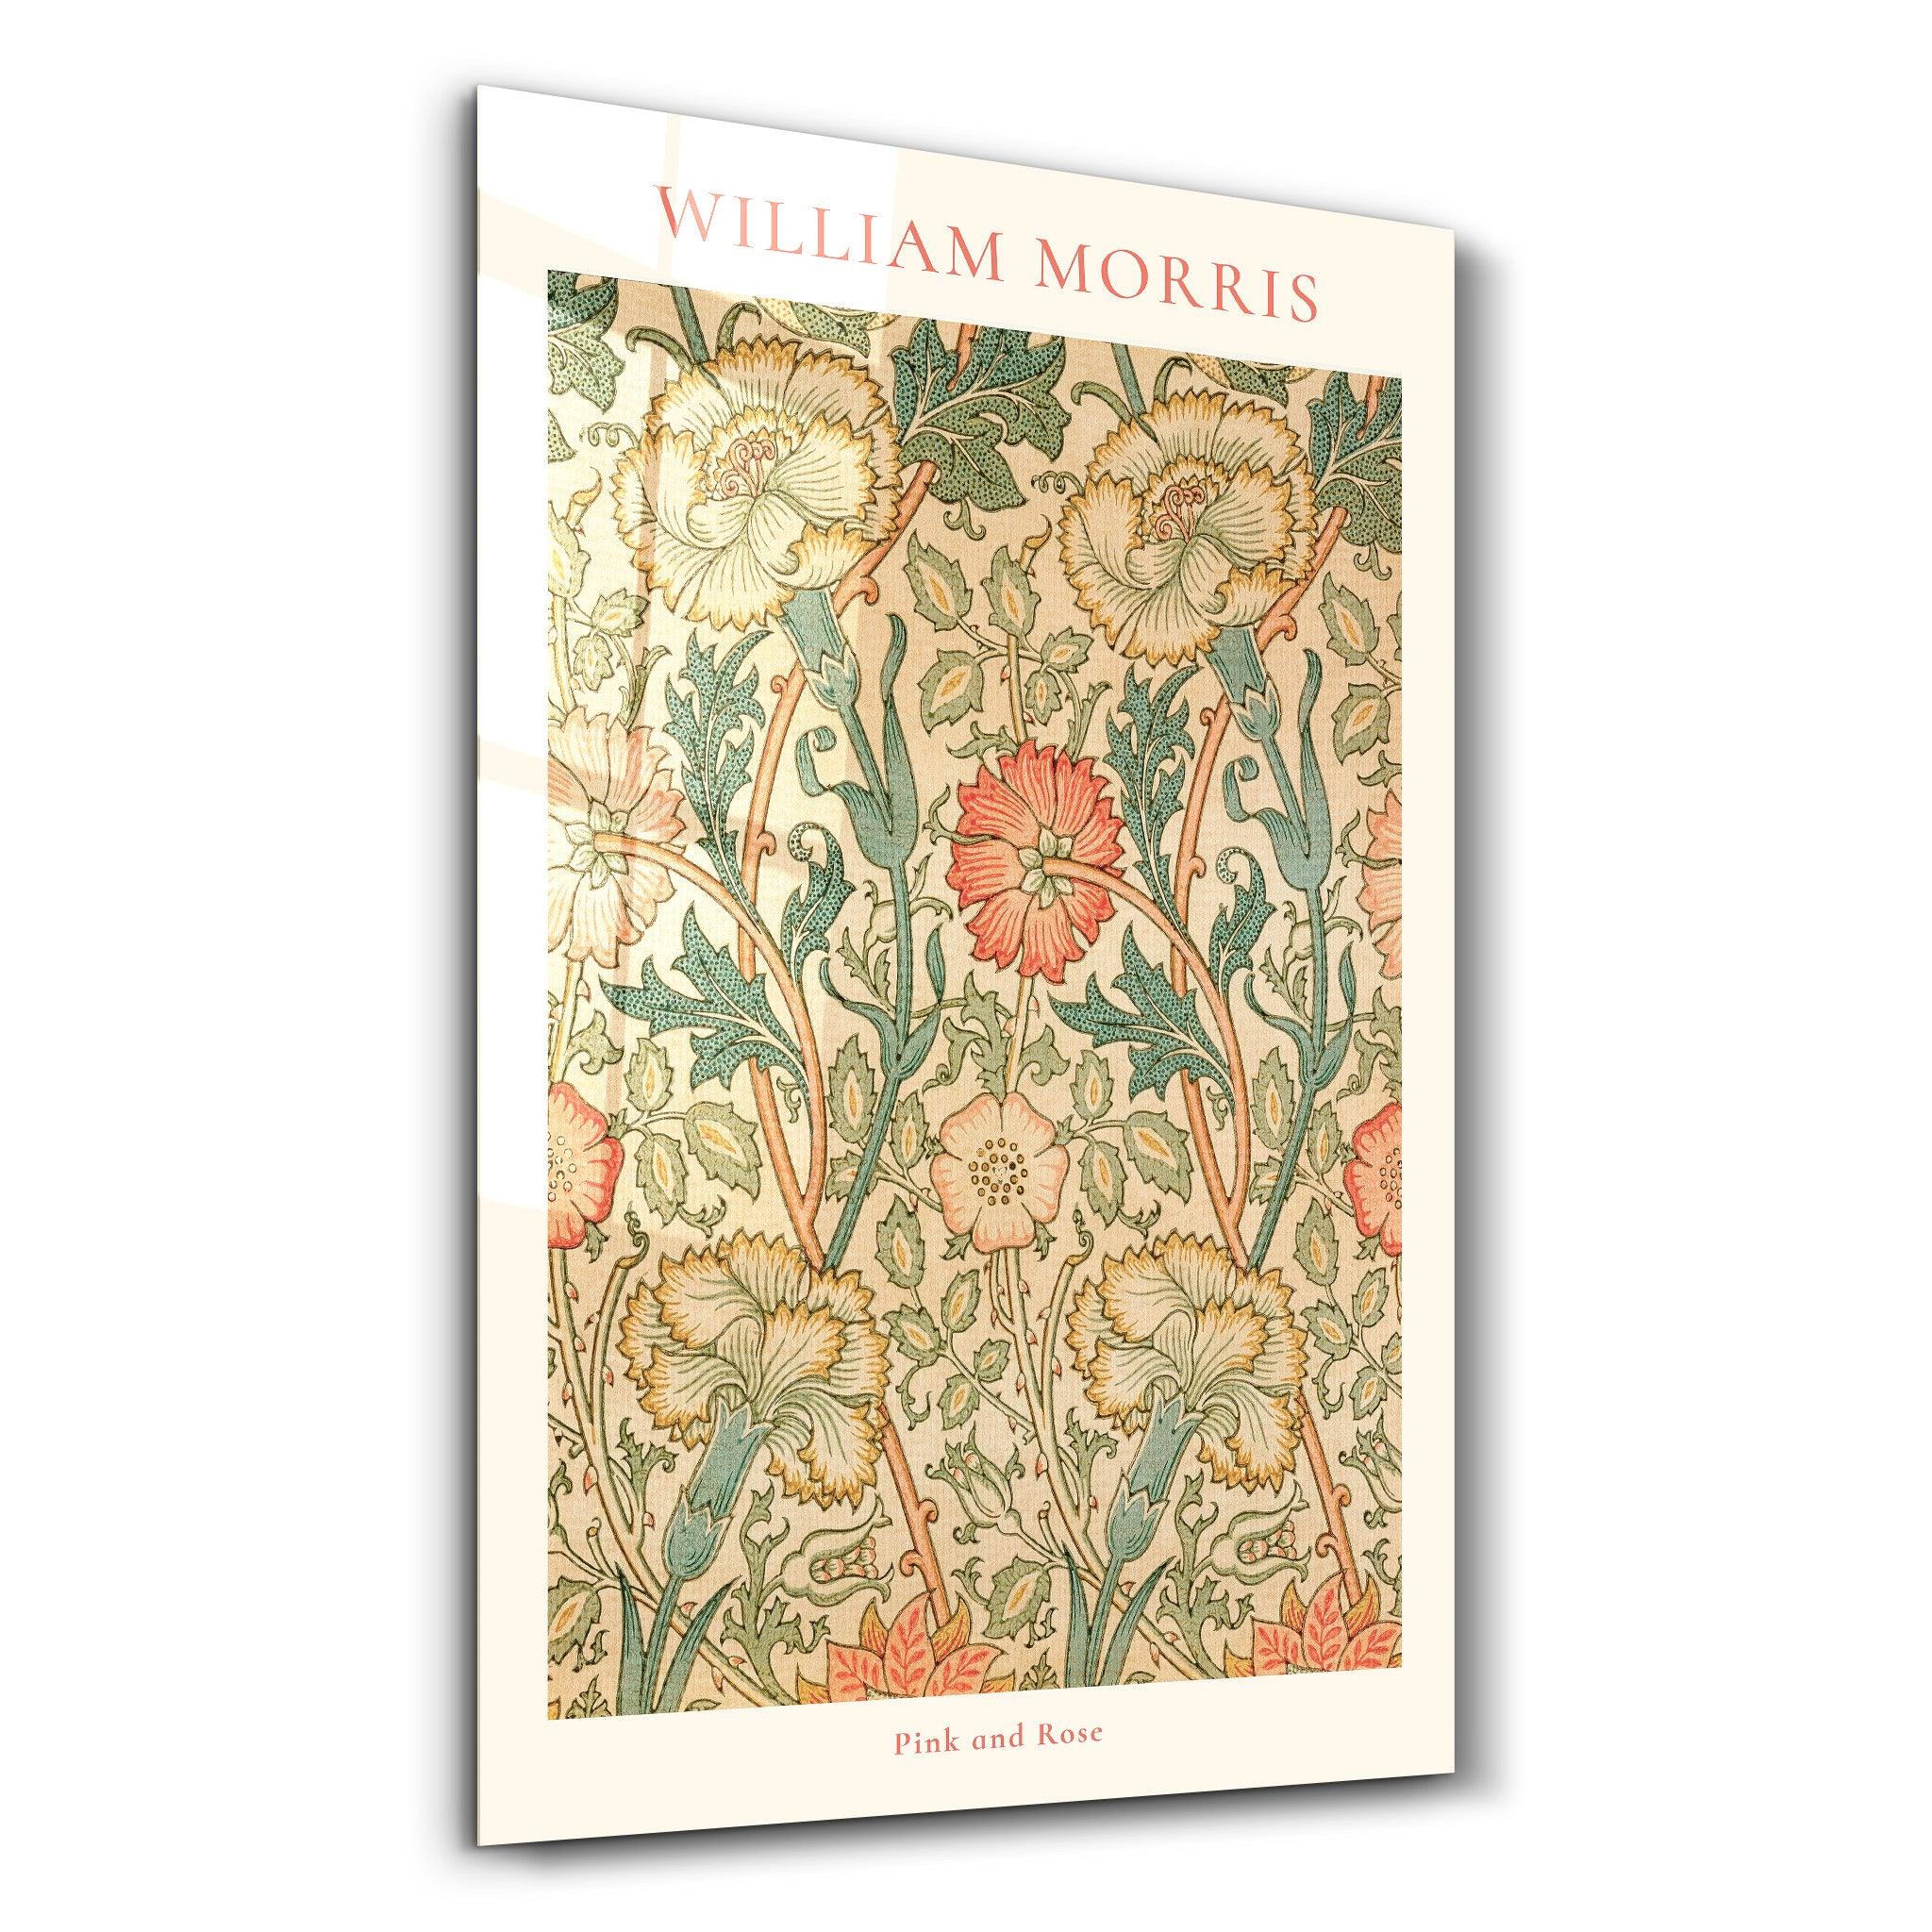 William Morris - Pink and Rose | Gallery Print Collection Glass Wall Art - ArtDesigna Glass Printing Wall Art